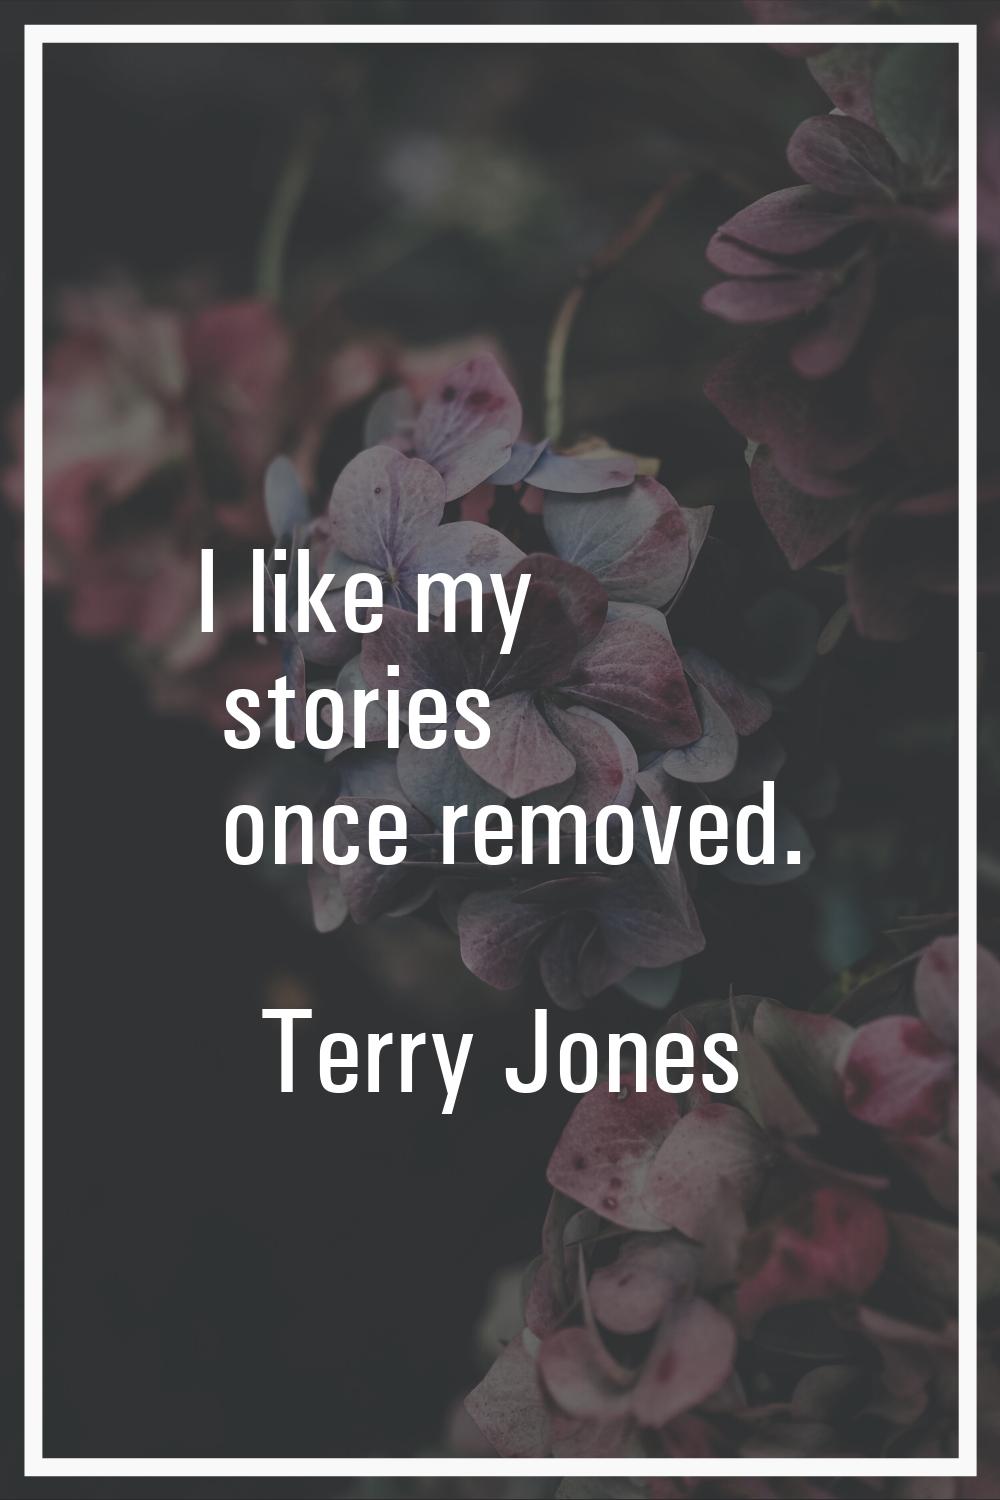 I like my stories once removed.